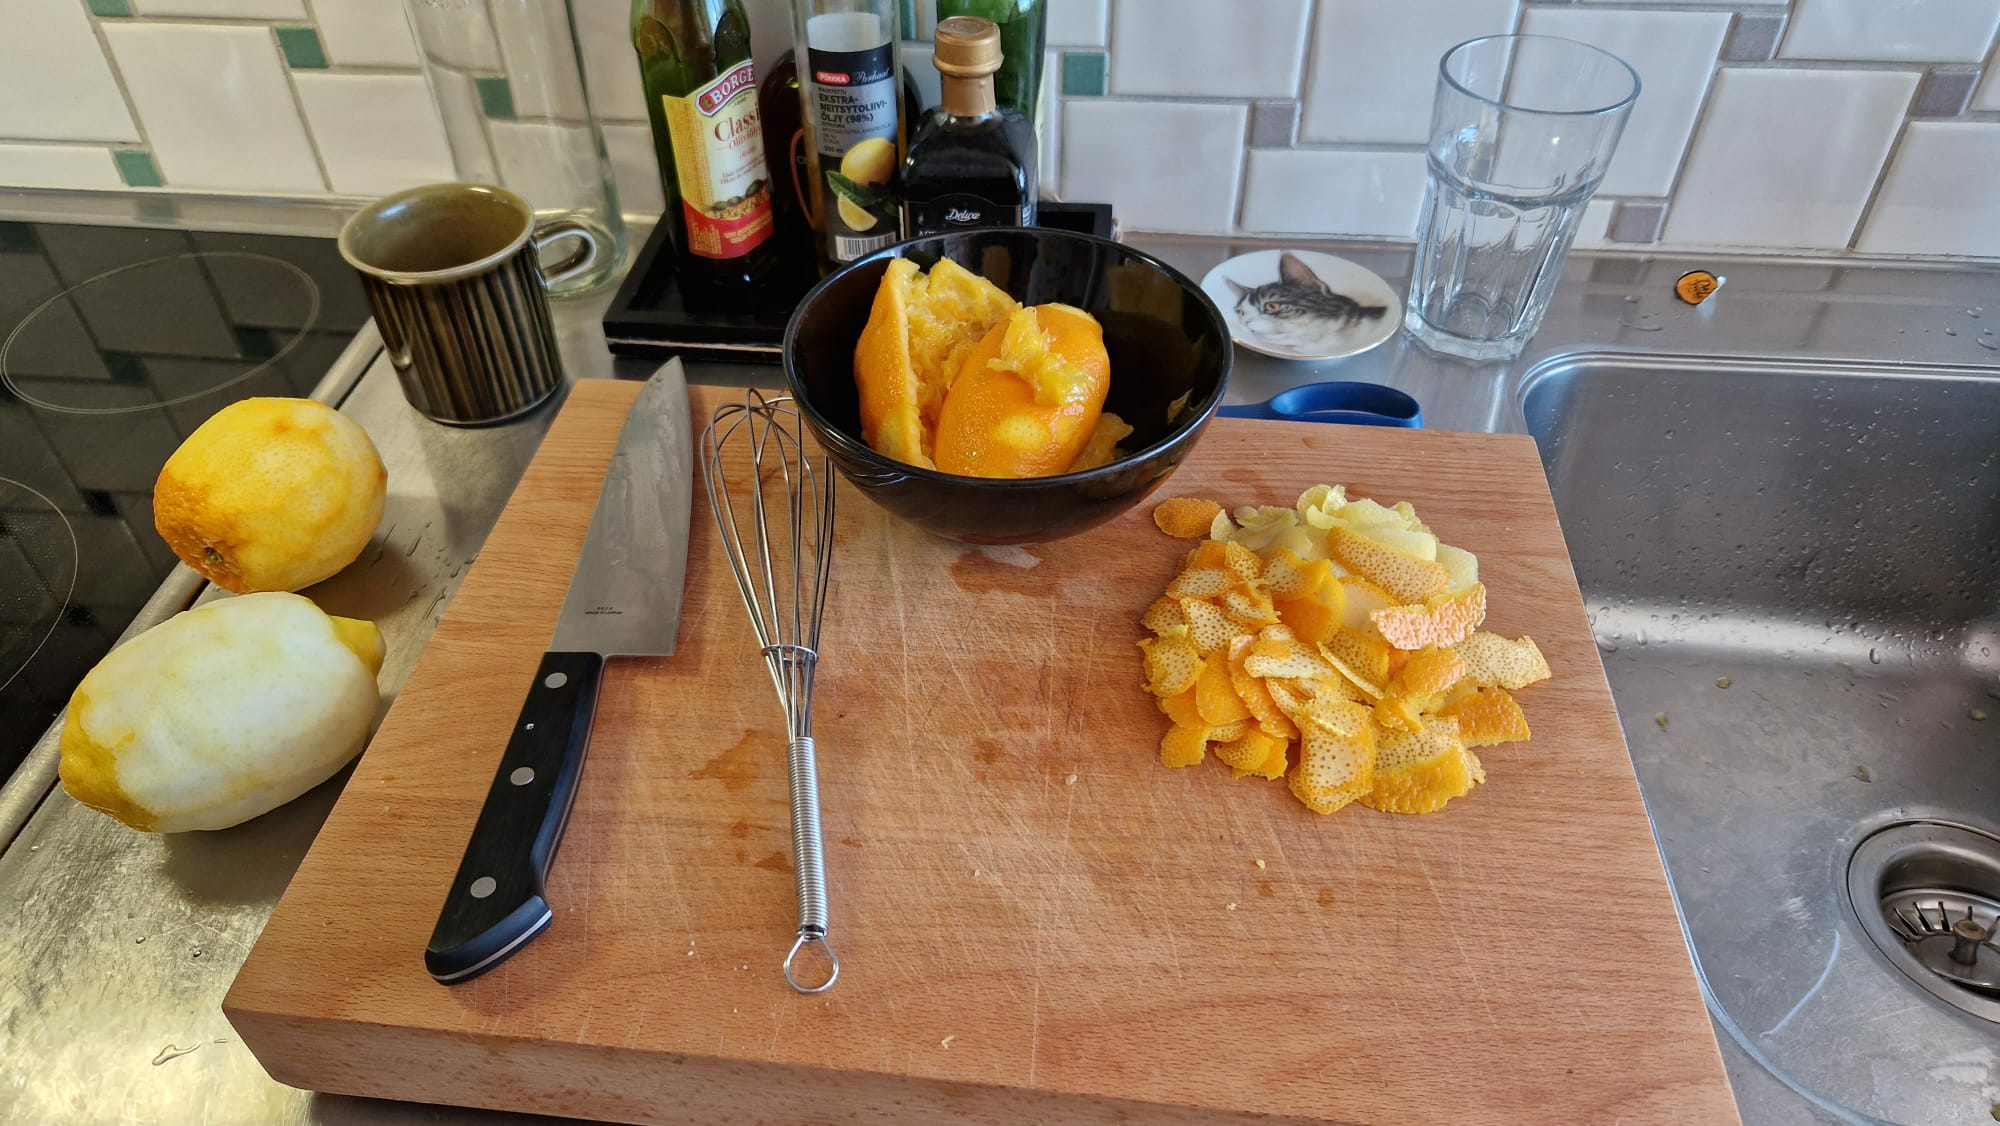 Cutting board with citrus fruits and cooking utensils